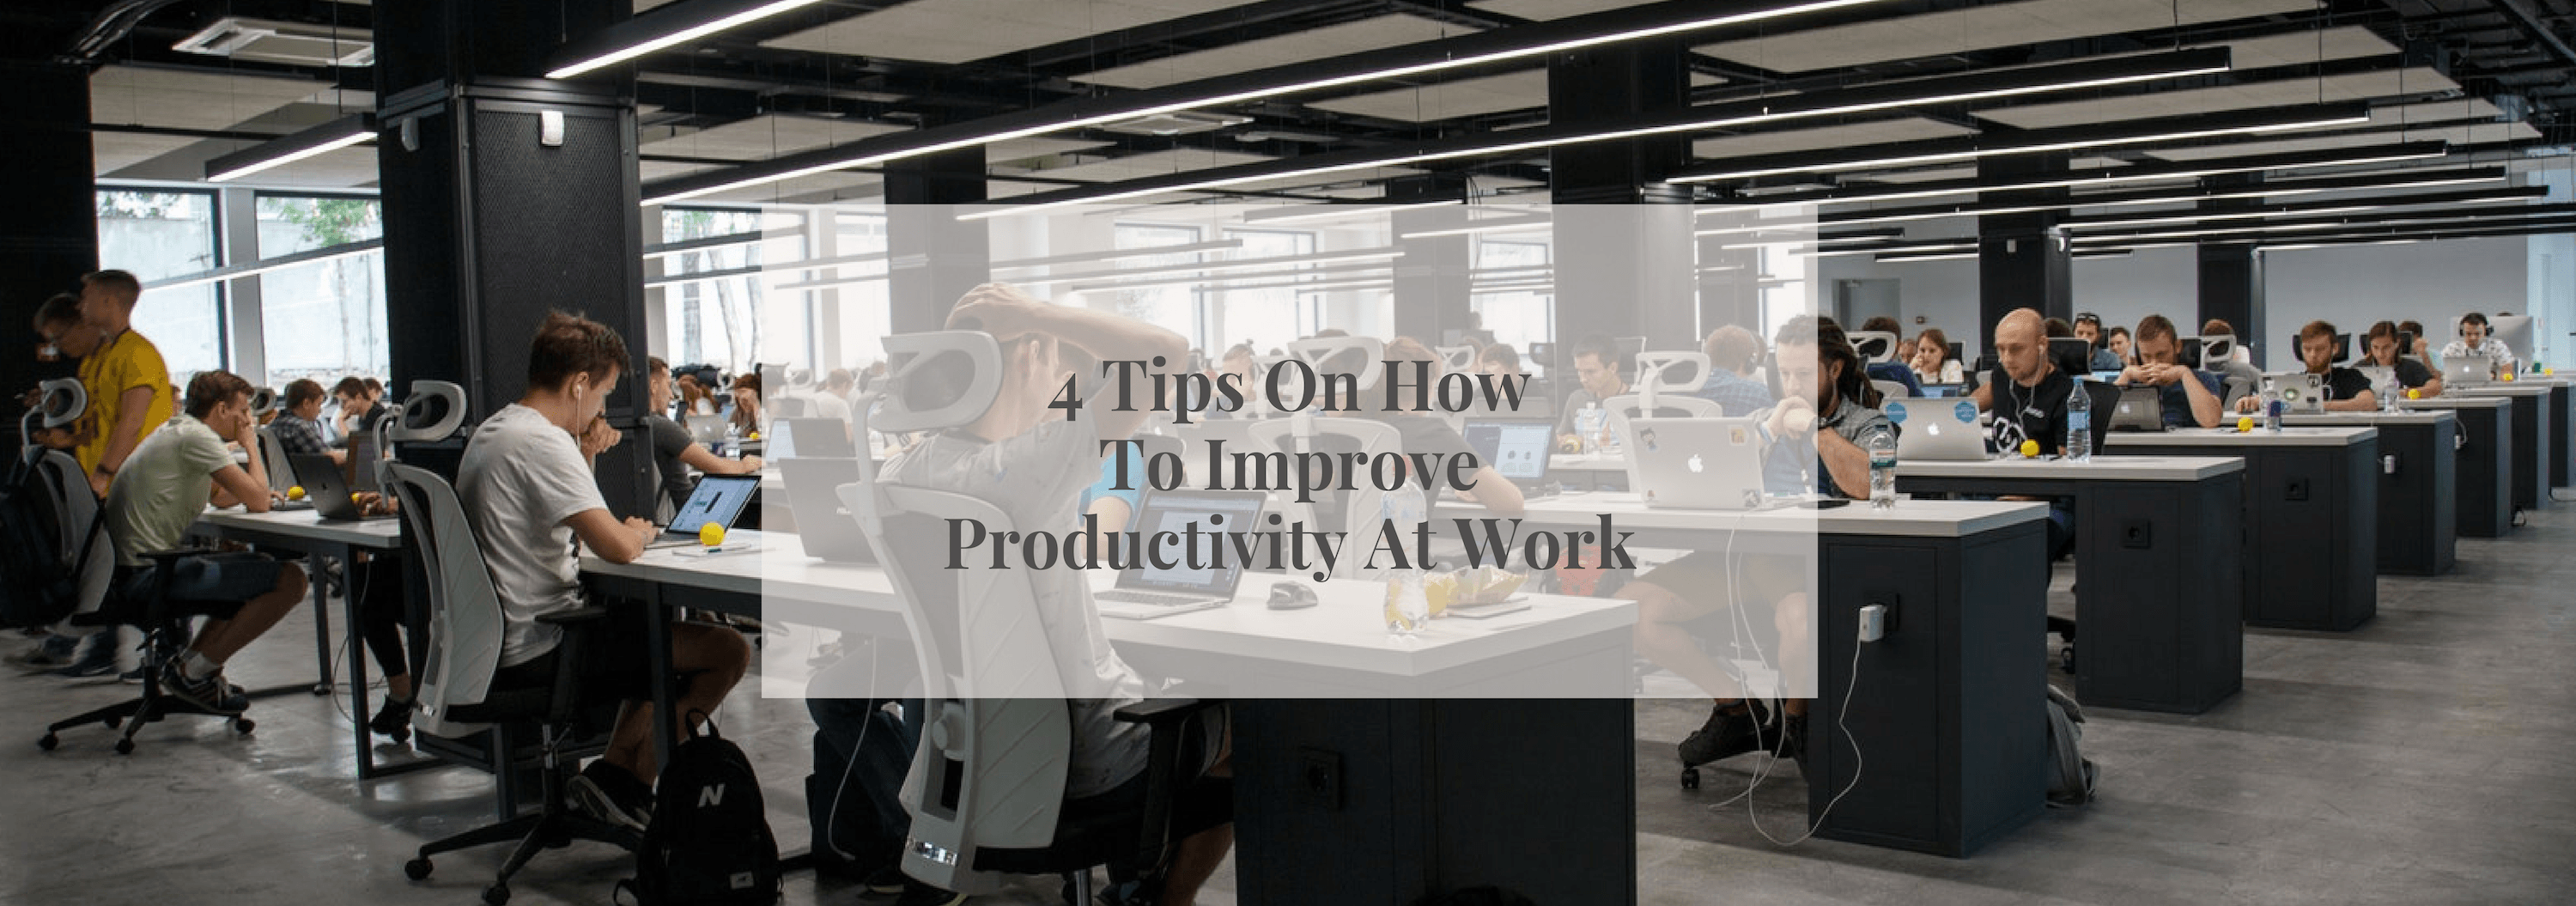 4 Tips On How To Improve Productivity At Work - Numi